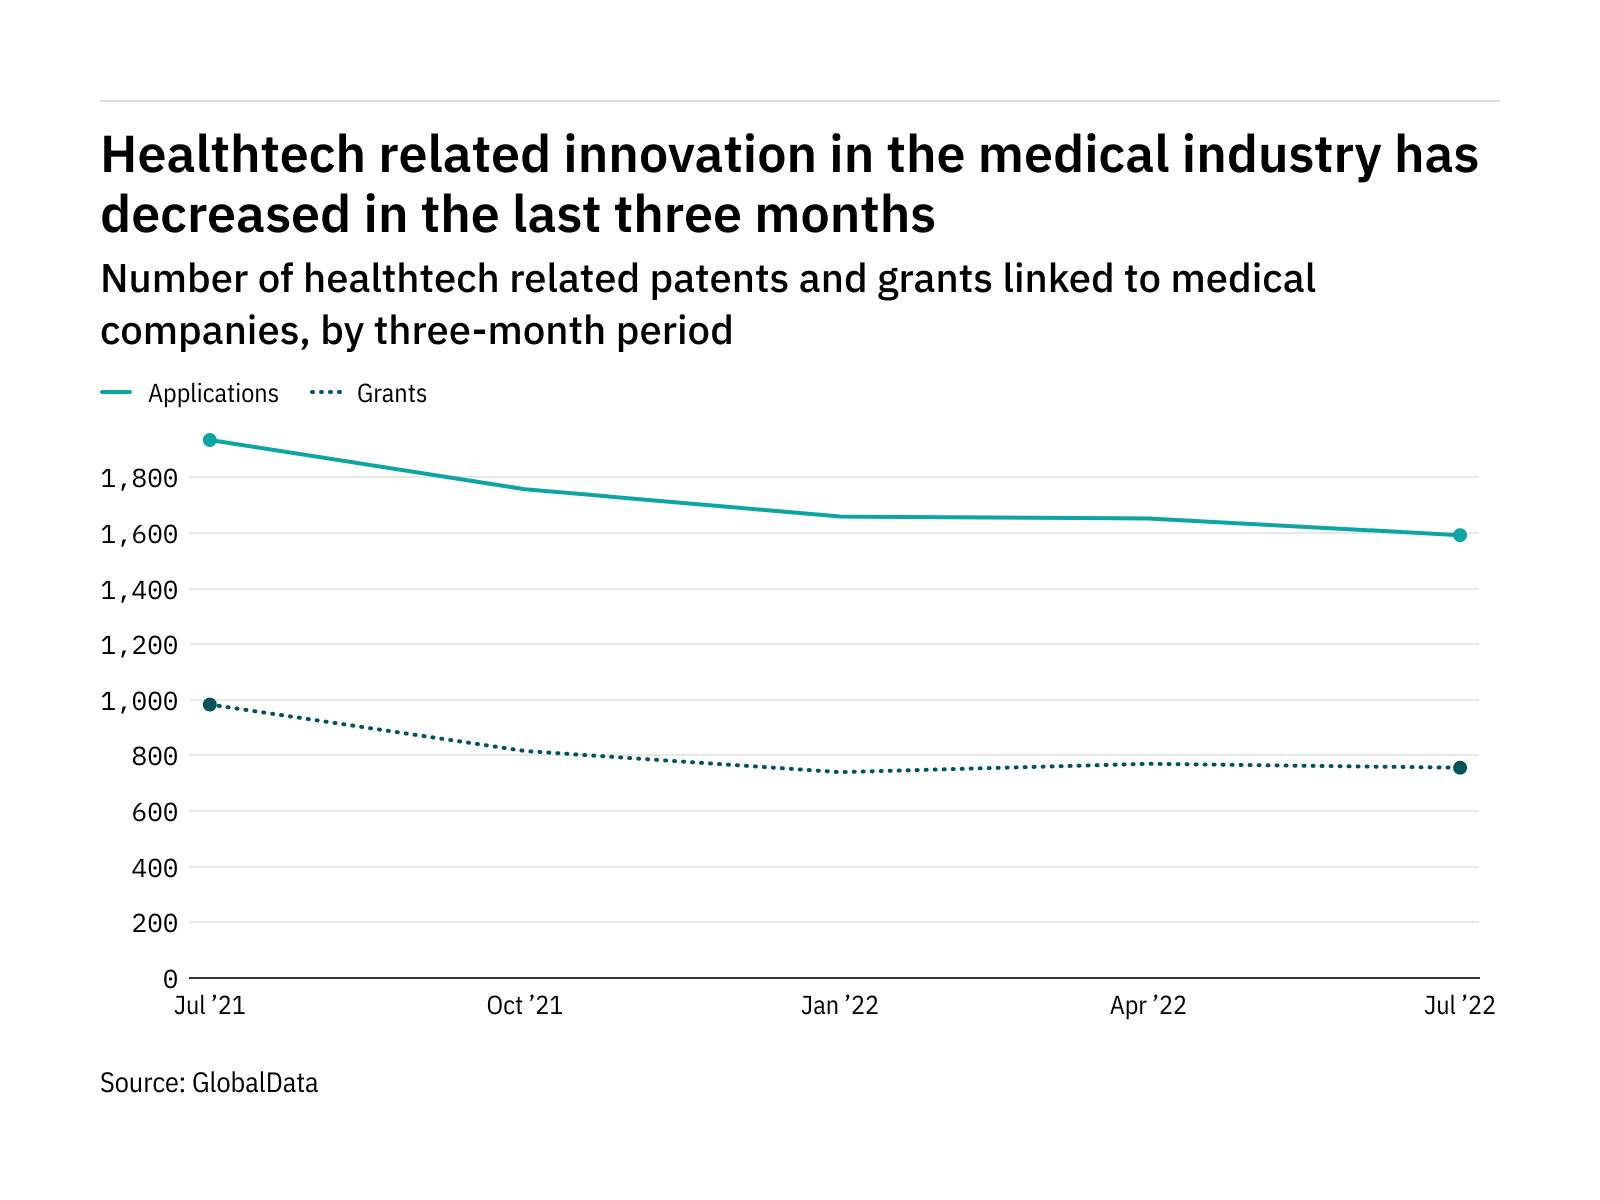 Healthtech innovation among medical industry companies has dropped off in the last three months